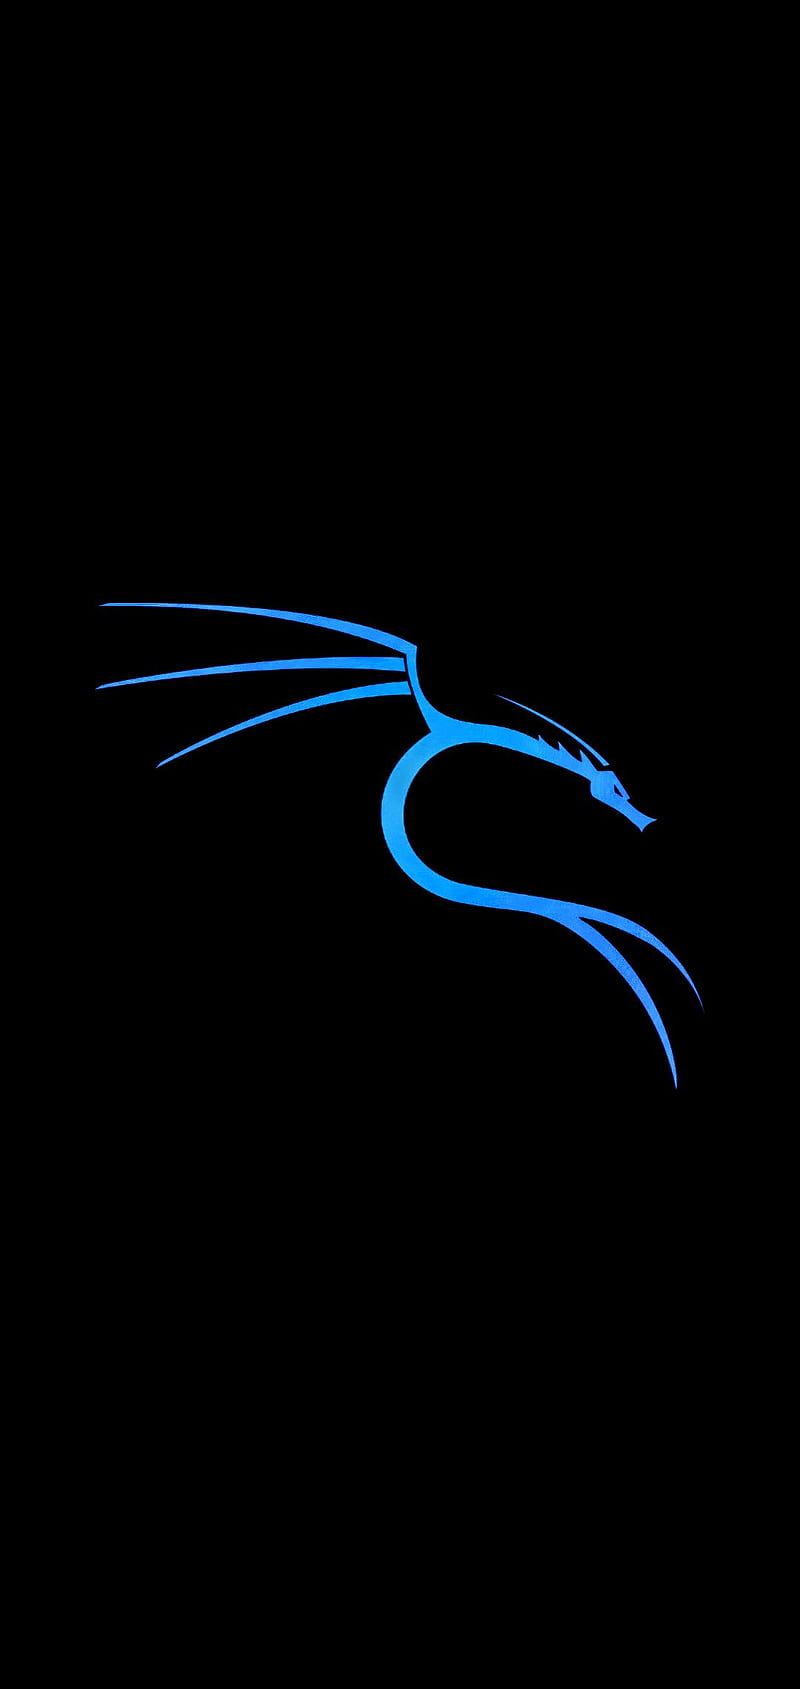 Kali Linux Android Wallpapers  Wallpaper Cave